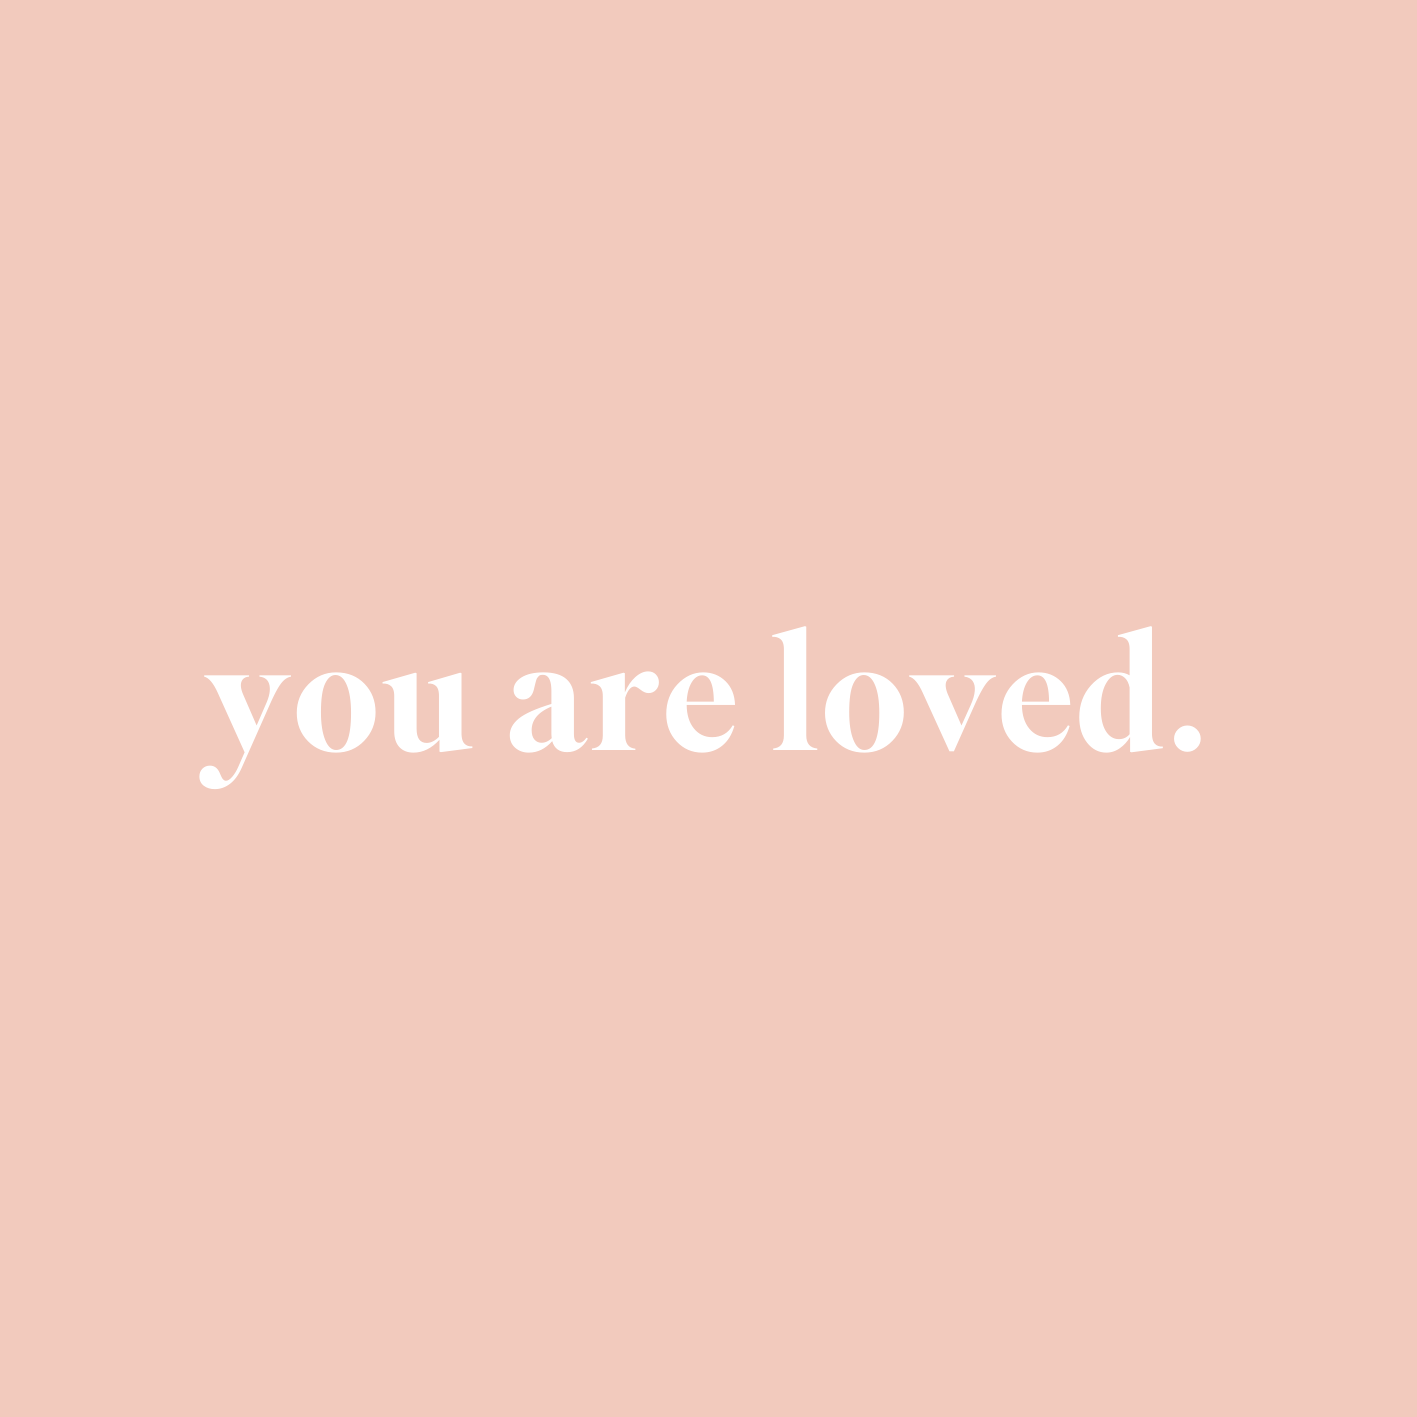 A pink background with the words "you are loved" by biglittlegifting.